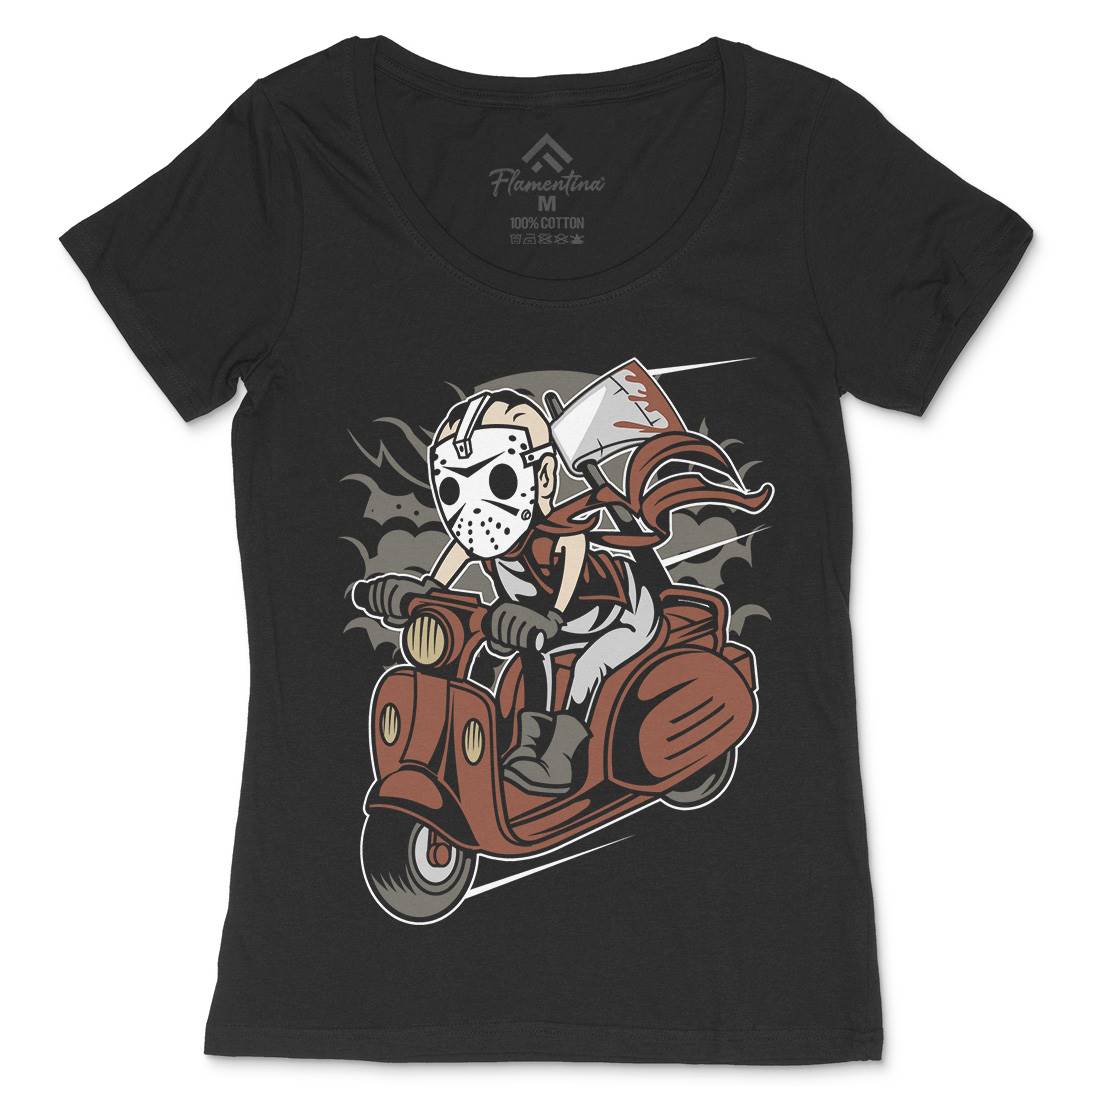 Slayer Scooter Womens Scoop Neck T-Shirt Motorcycles C447